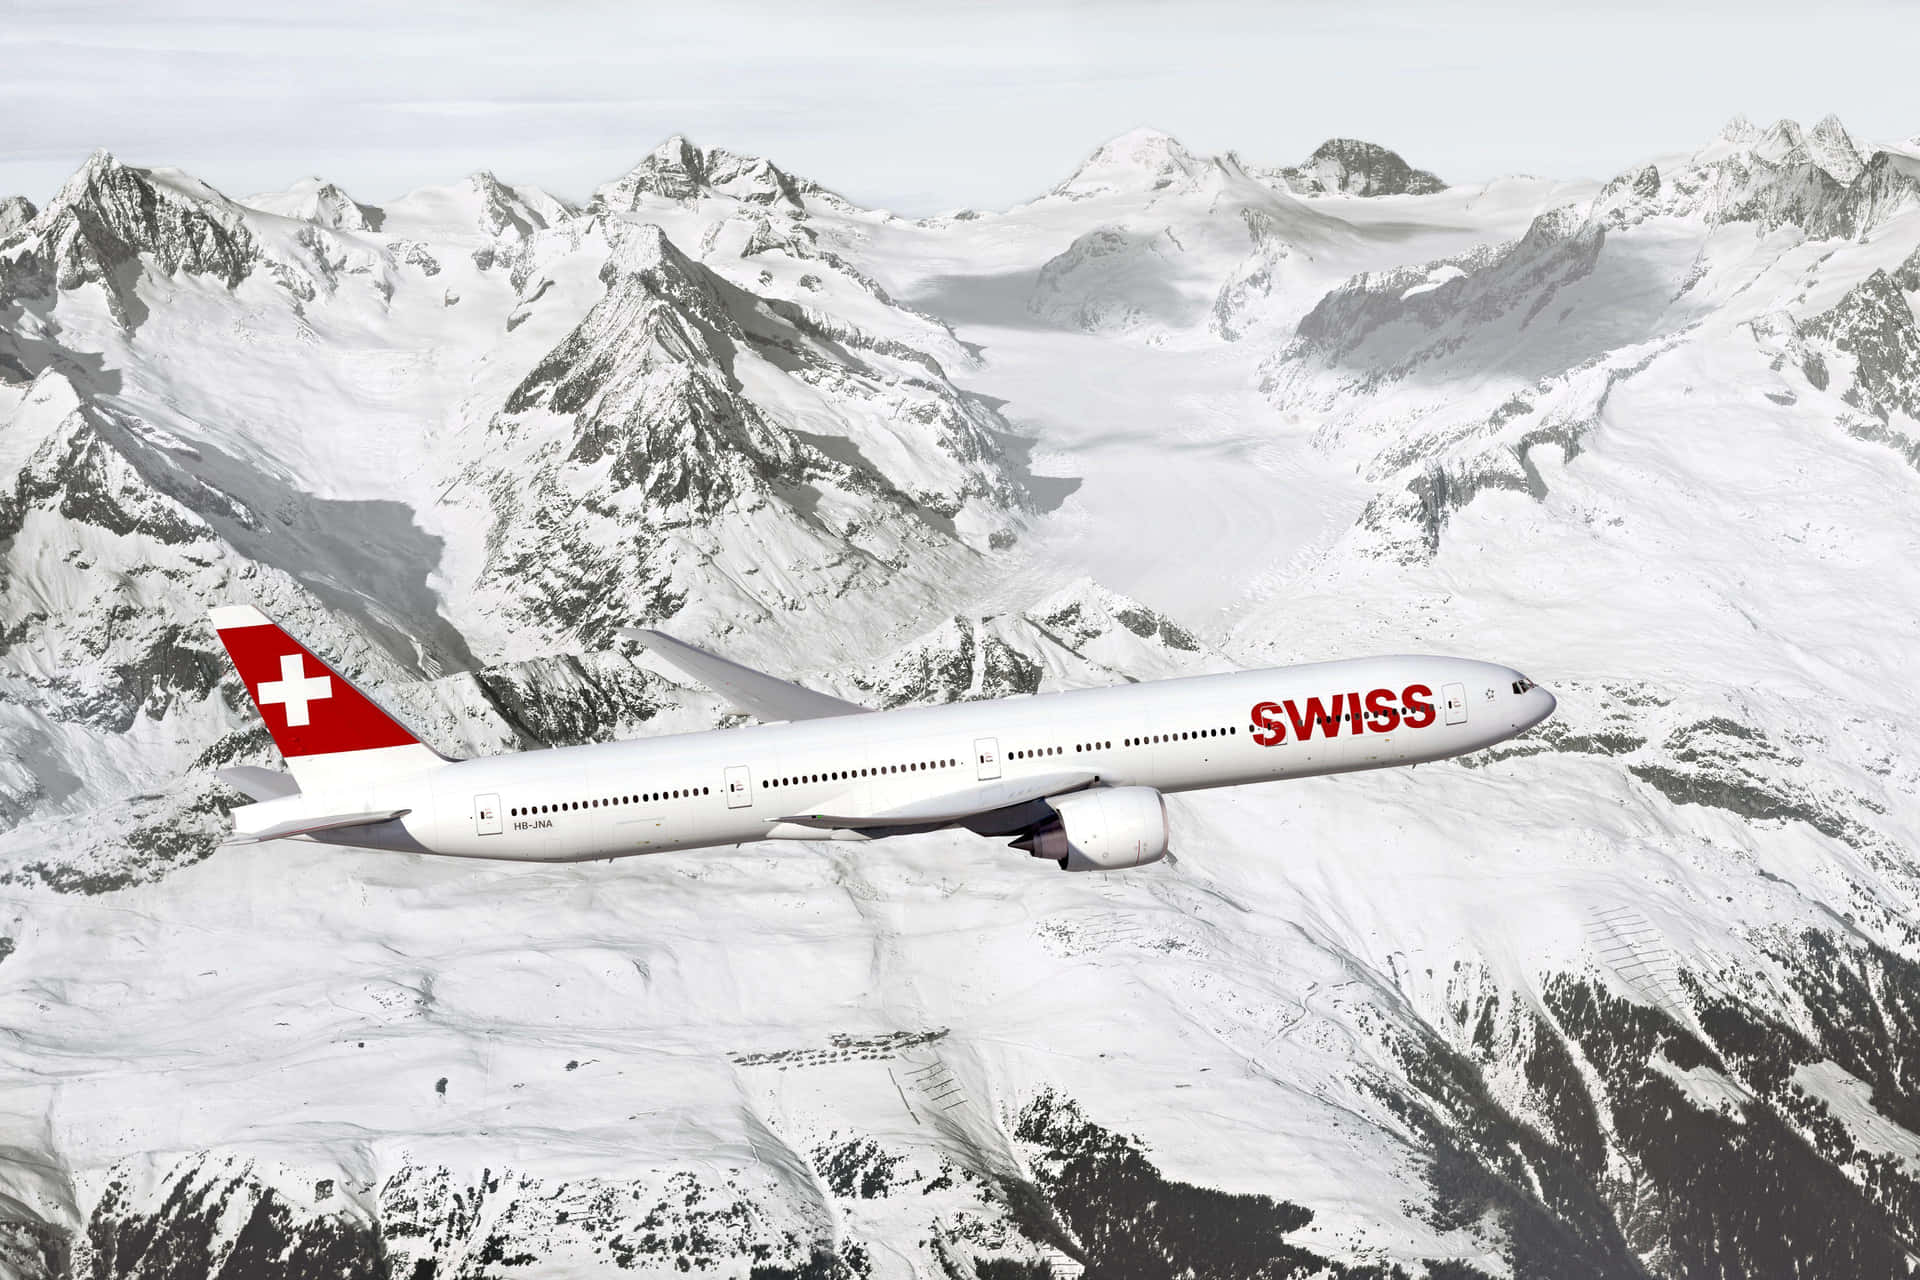 Swiss Airplane Over Snowy Mountains Wallpaper